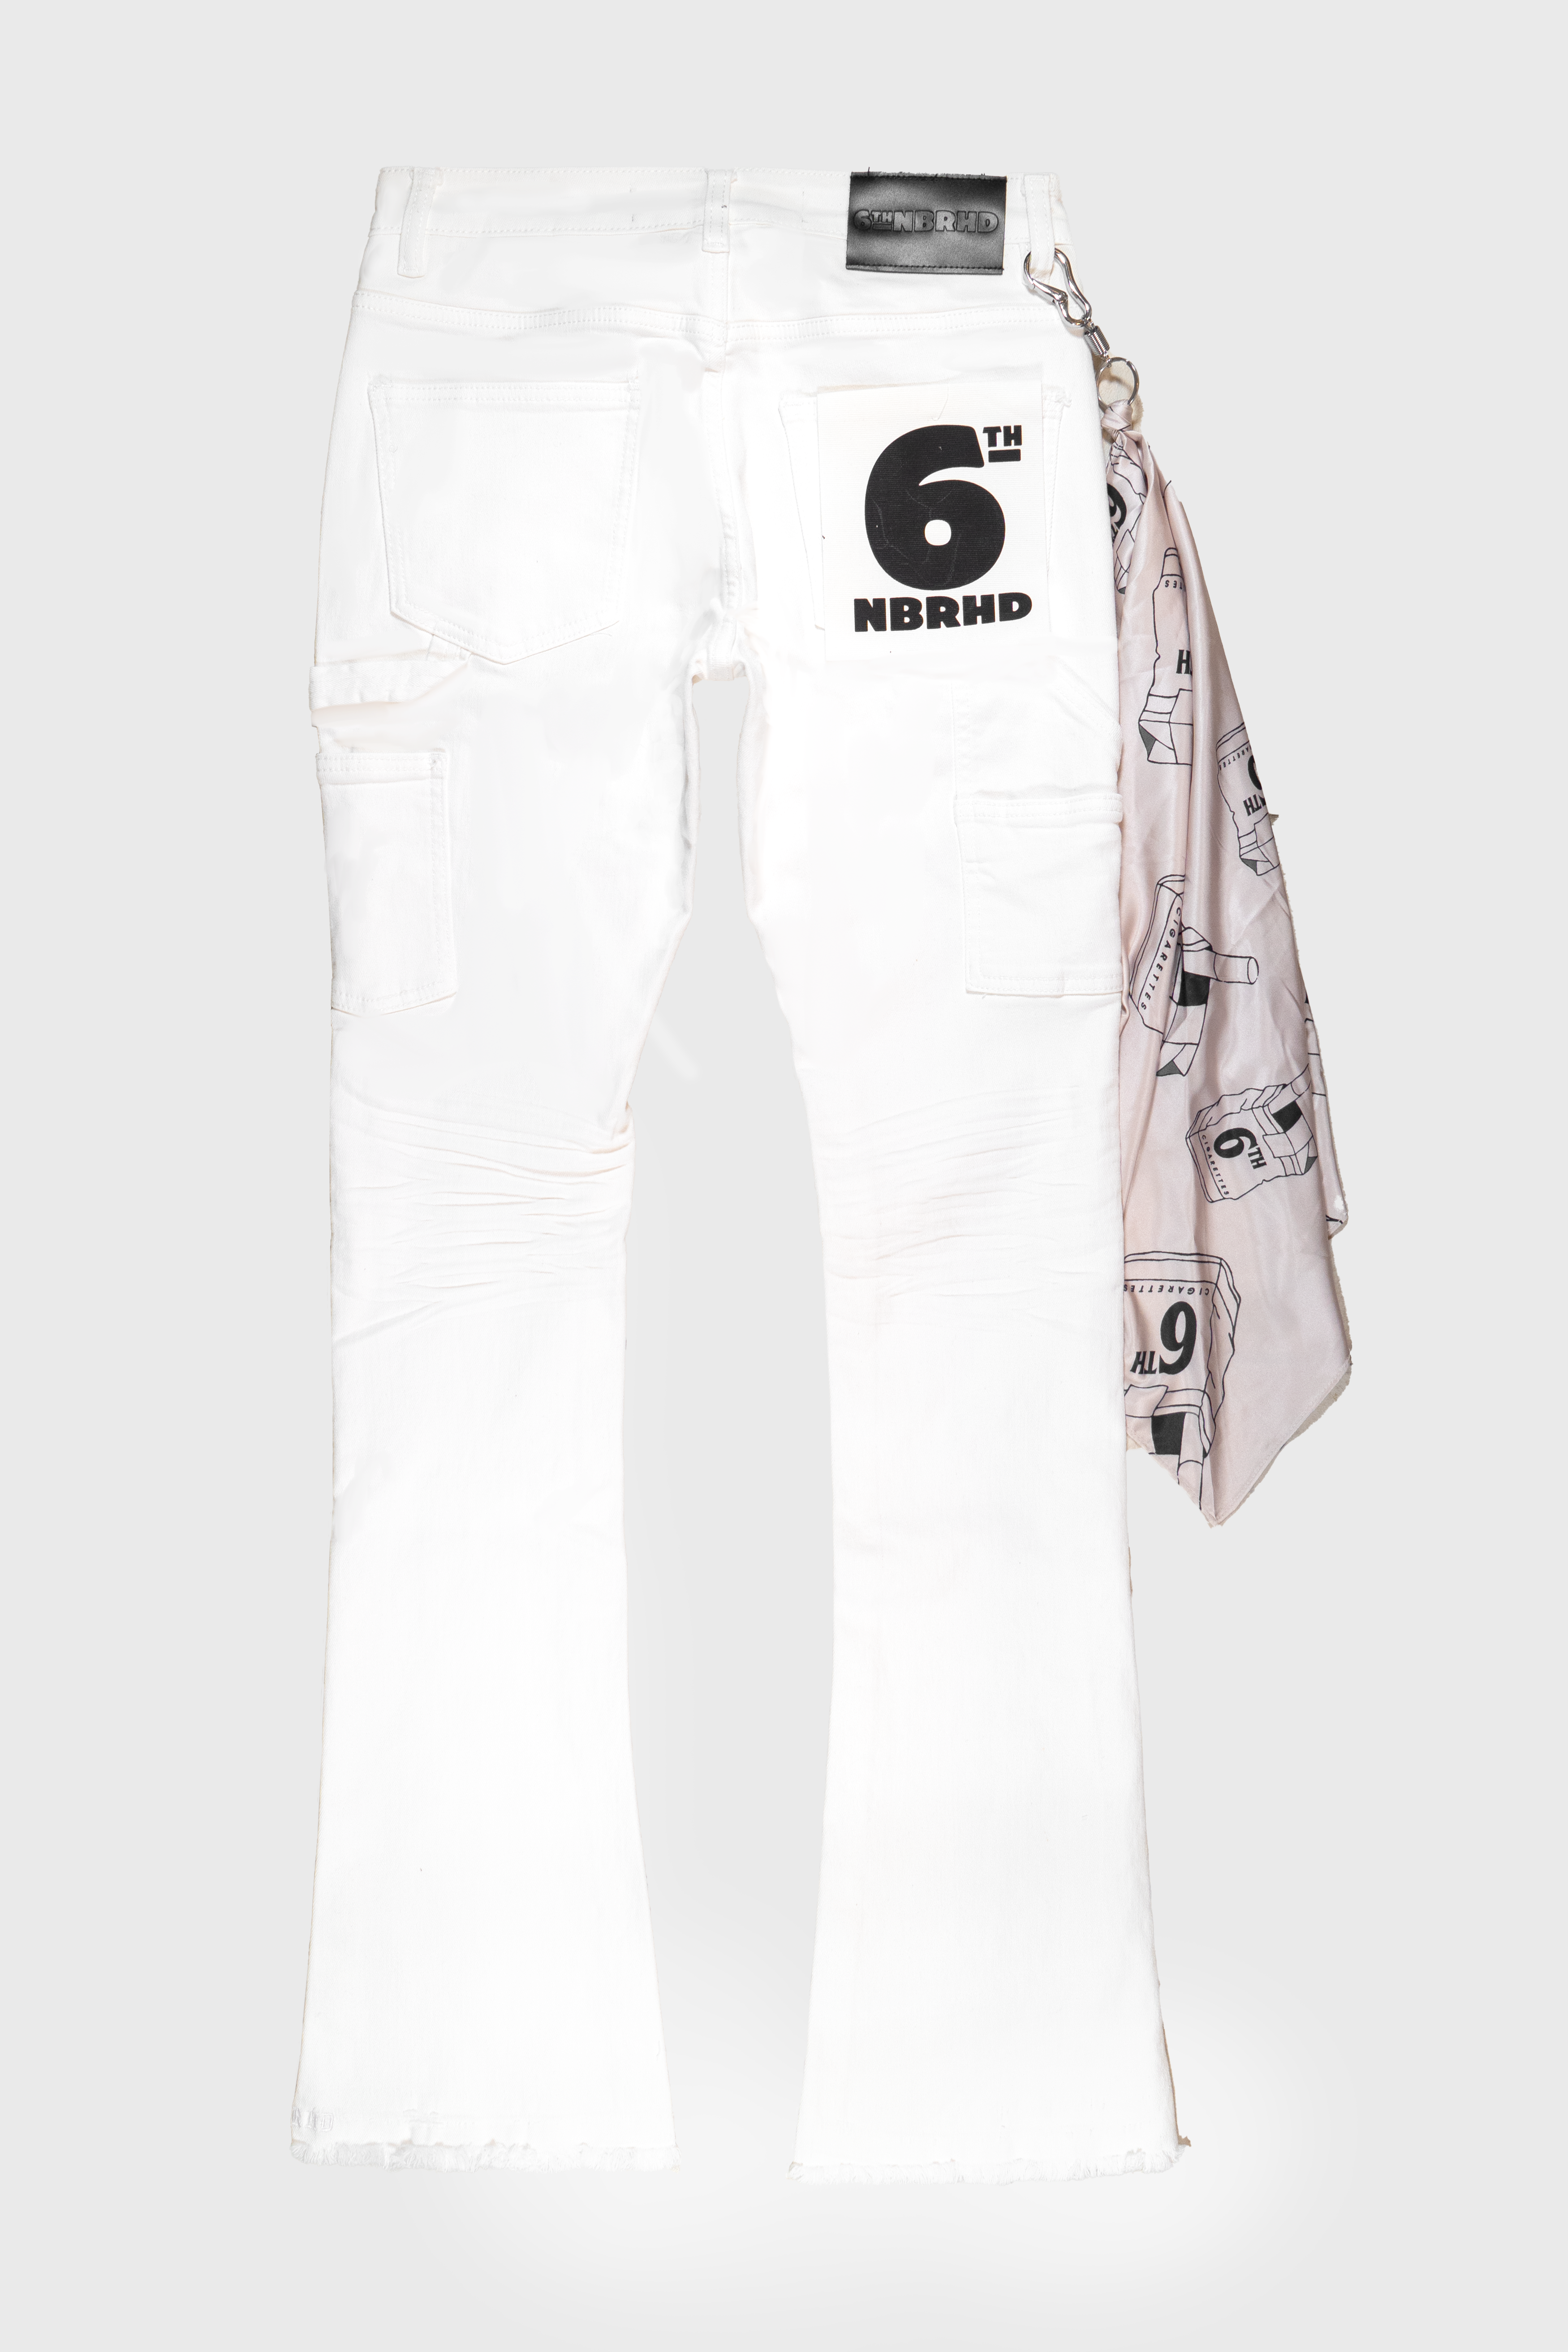 6thNBRHD SUPER STACKED "THE CLASSIC" -WHITE